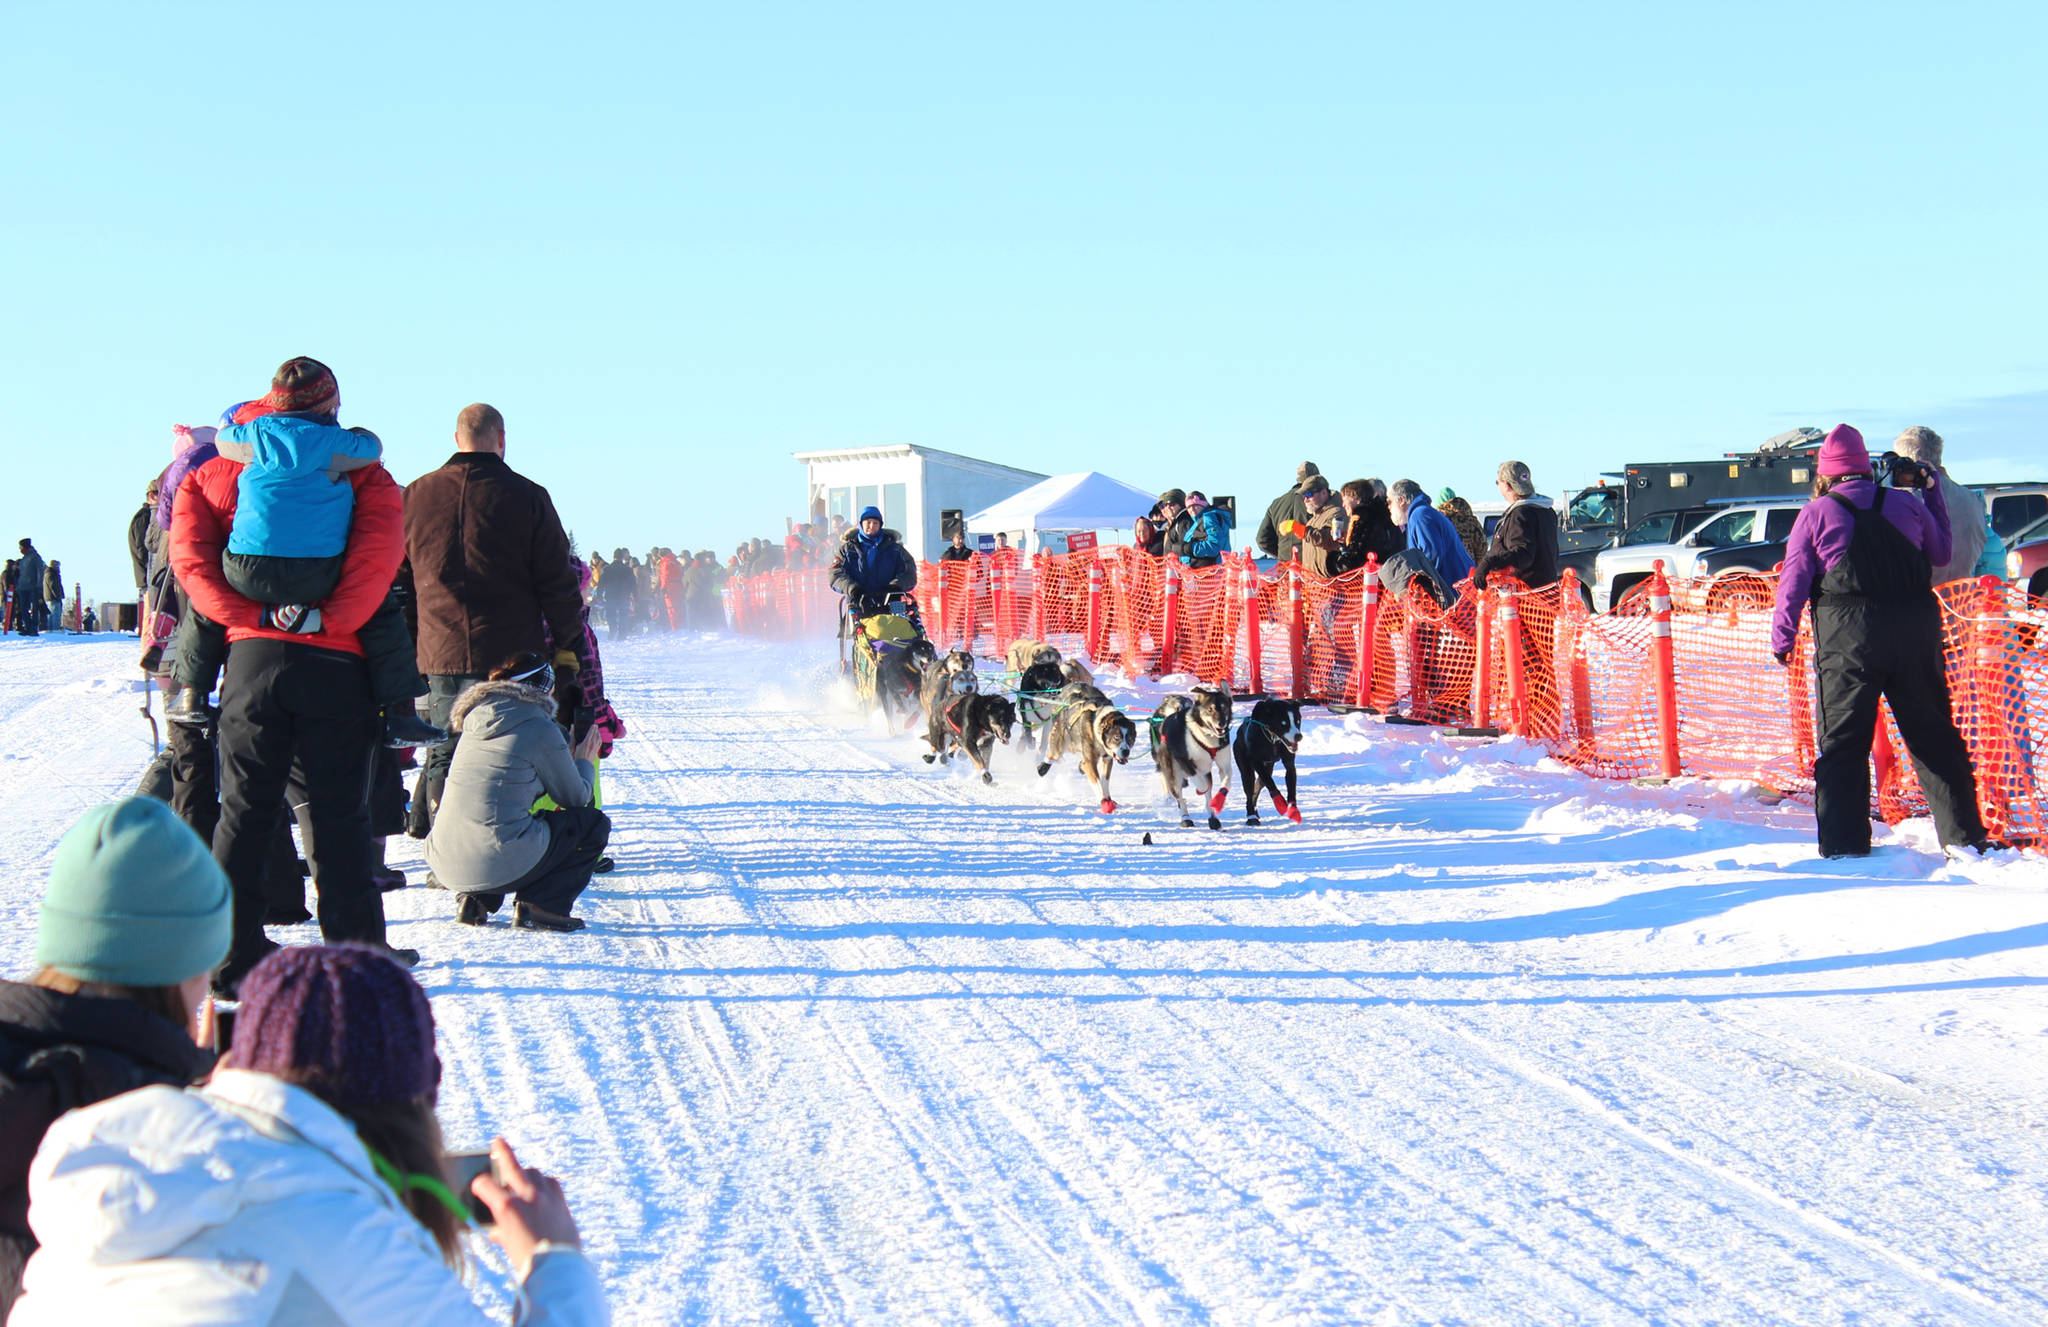 Onlookers line the race trail and snap photos as a sled dog team takes off from the starting line of the Tustumena 200 Sled Dog Race on Saturday, Jan. 27, 2018 at Freddie’s Roadhouse in Ninilchik, Alaska. The race, which returned last year after being canceled in 2014, 2015 and 2016, is a roughly 100-mile loop that mushers will complete twice before finishing back in Ninilchik. (Photo by Megan Pacer/Homer News)